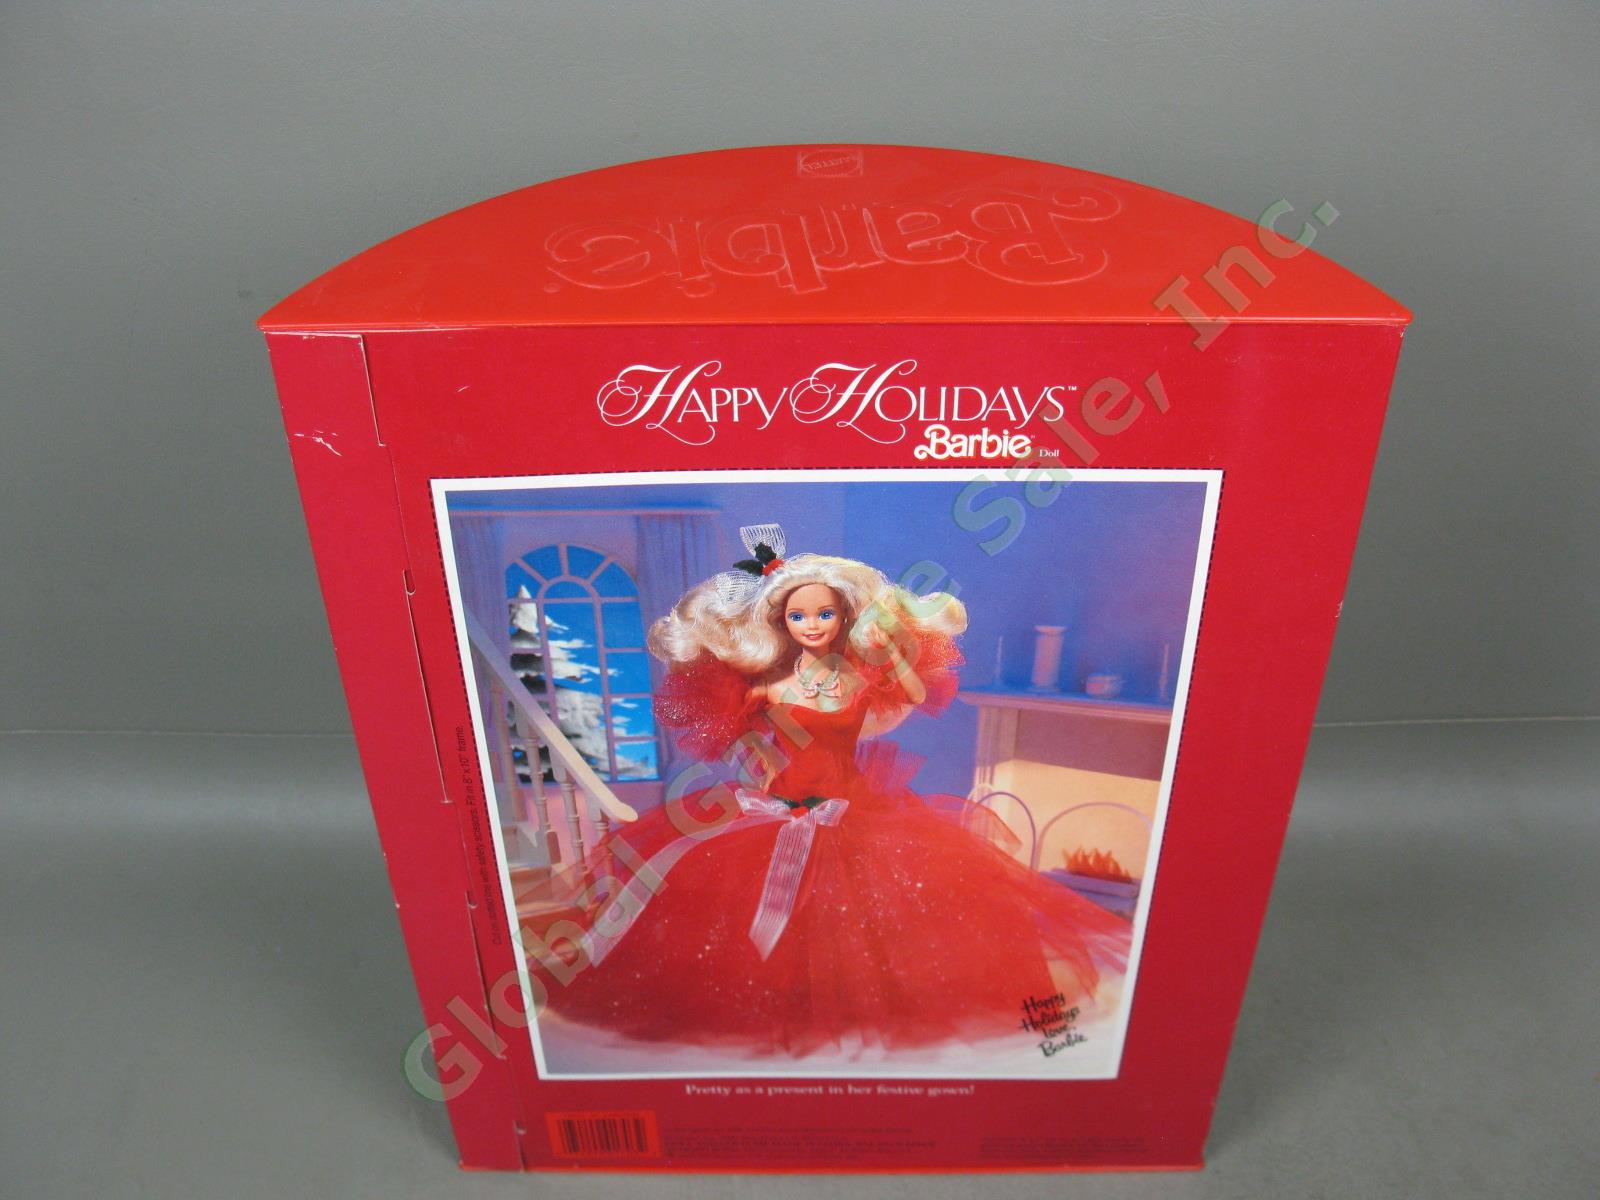 Vtg New Never Opened NRFB 1988 Happy Holidays Special Edition Barbie Doll In Box 3